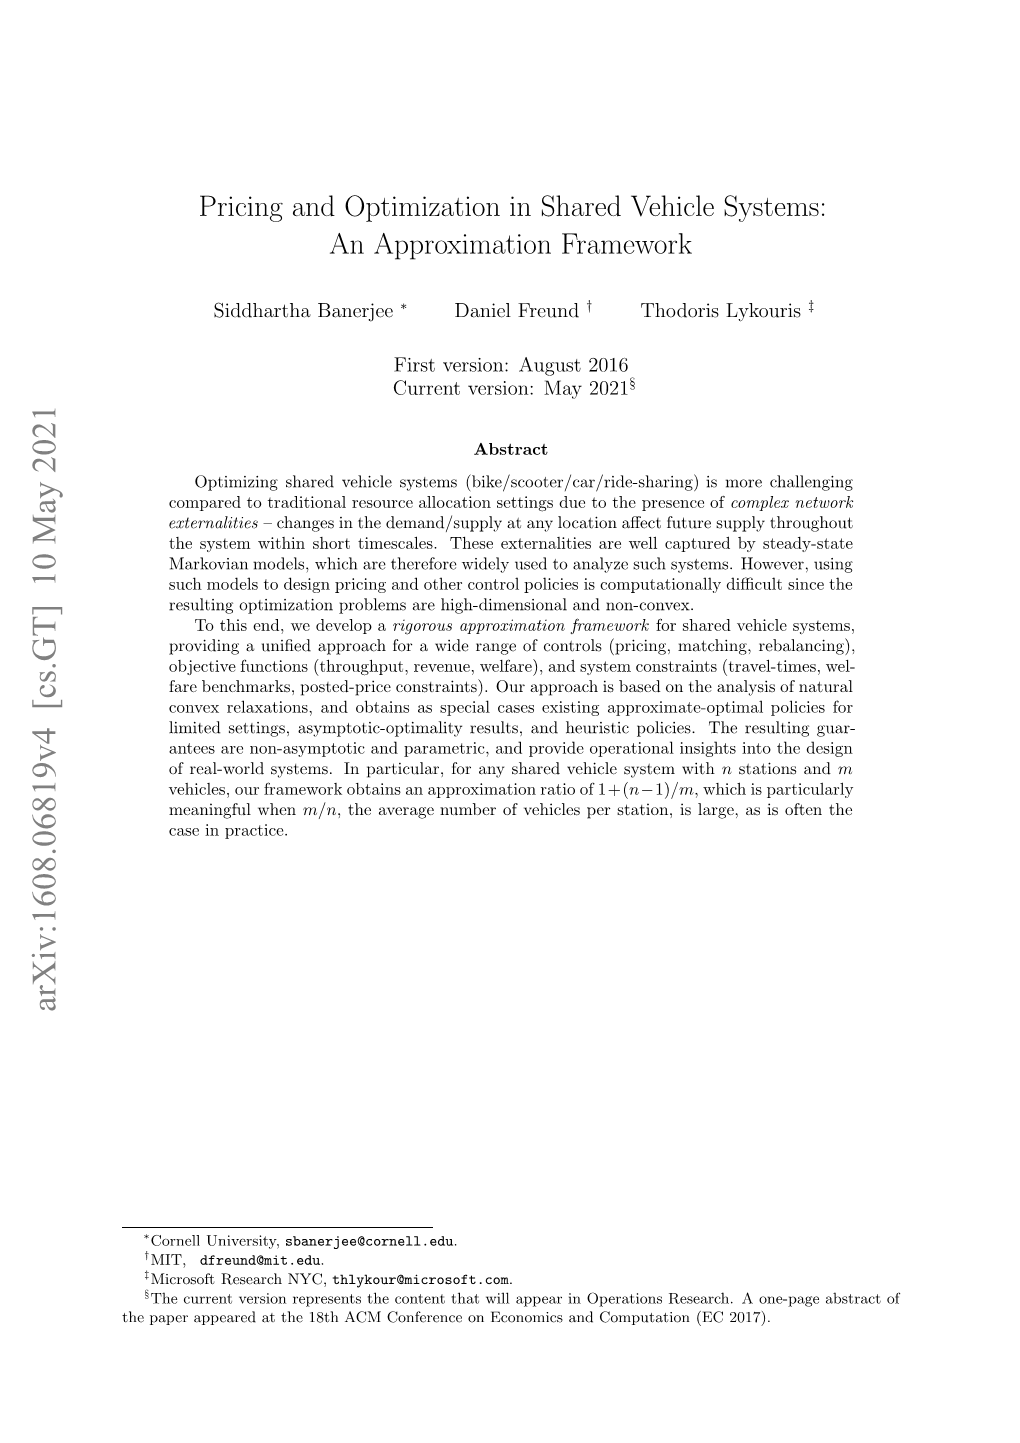 Pricing and Optimization in Shared Vehicle Systems: an Approximation